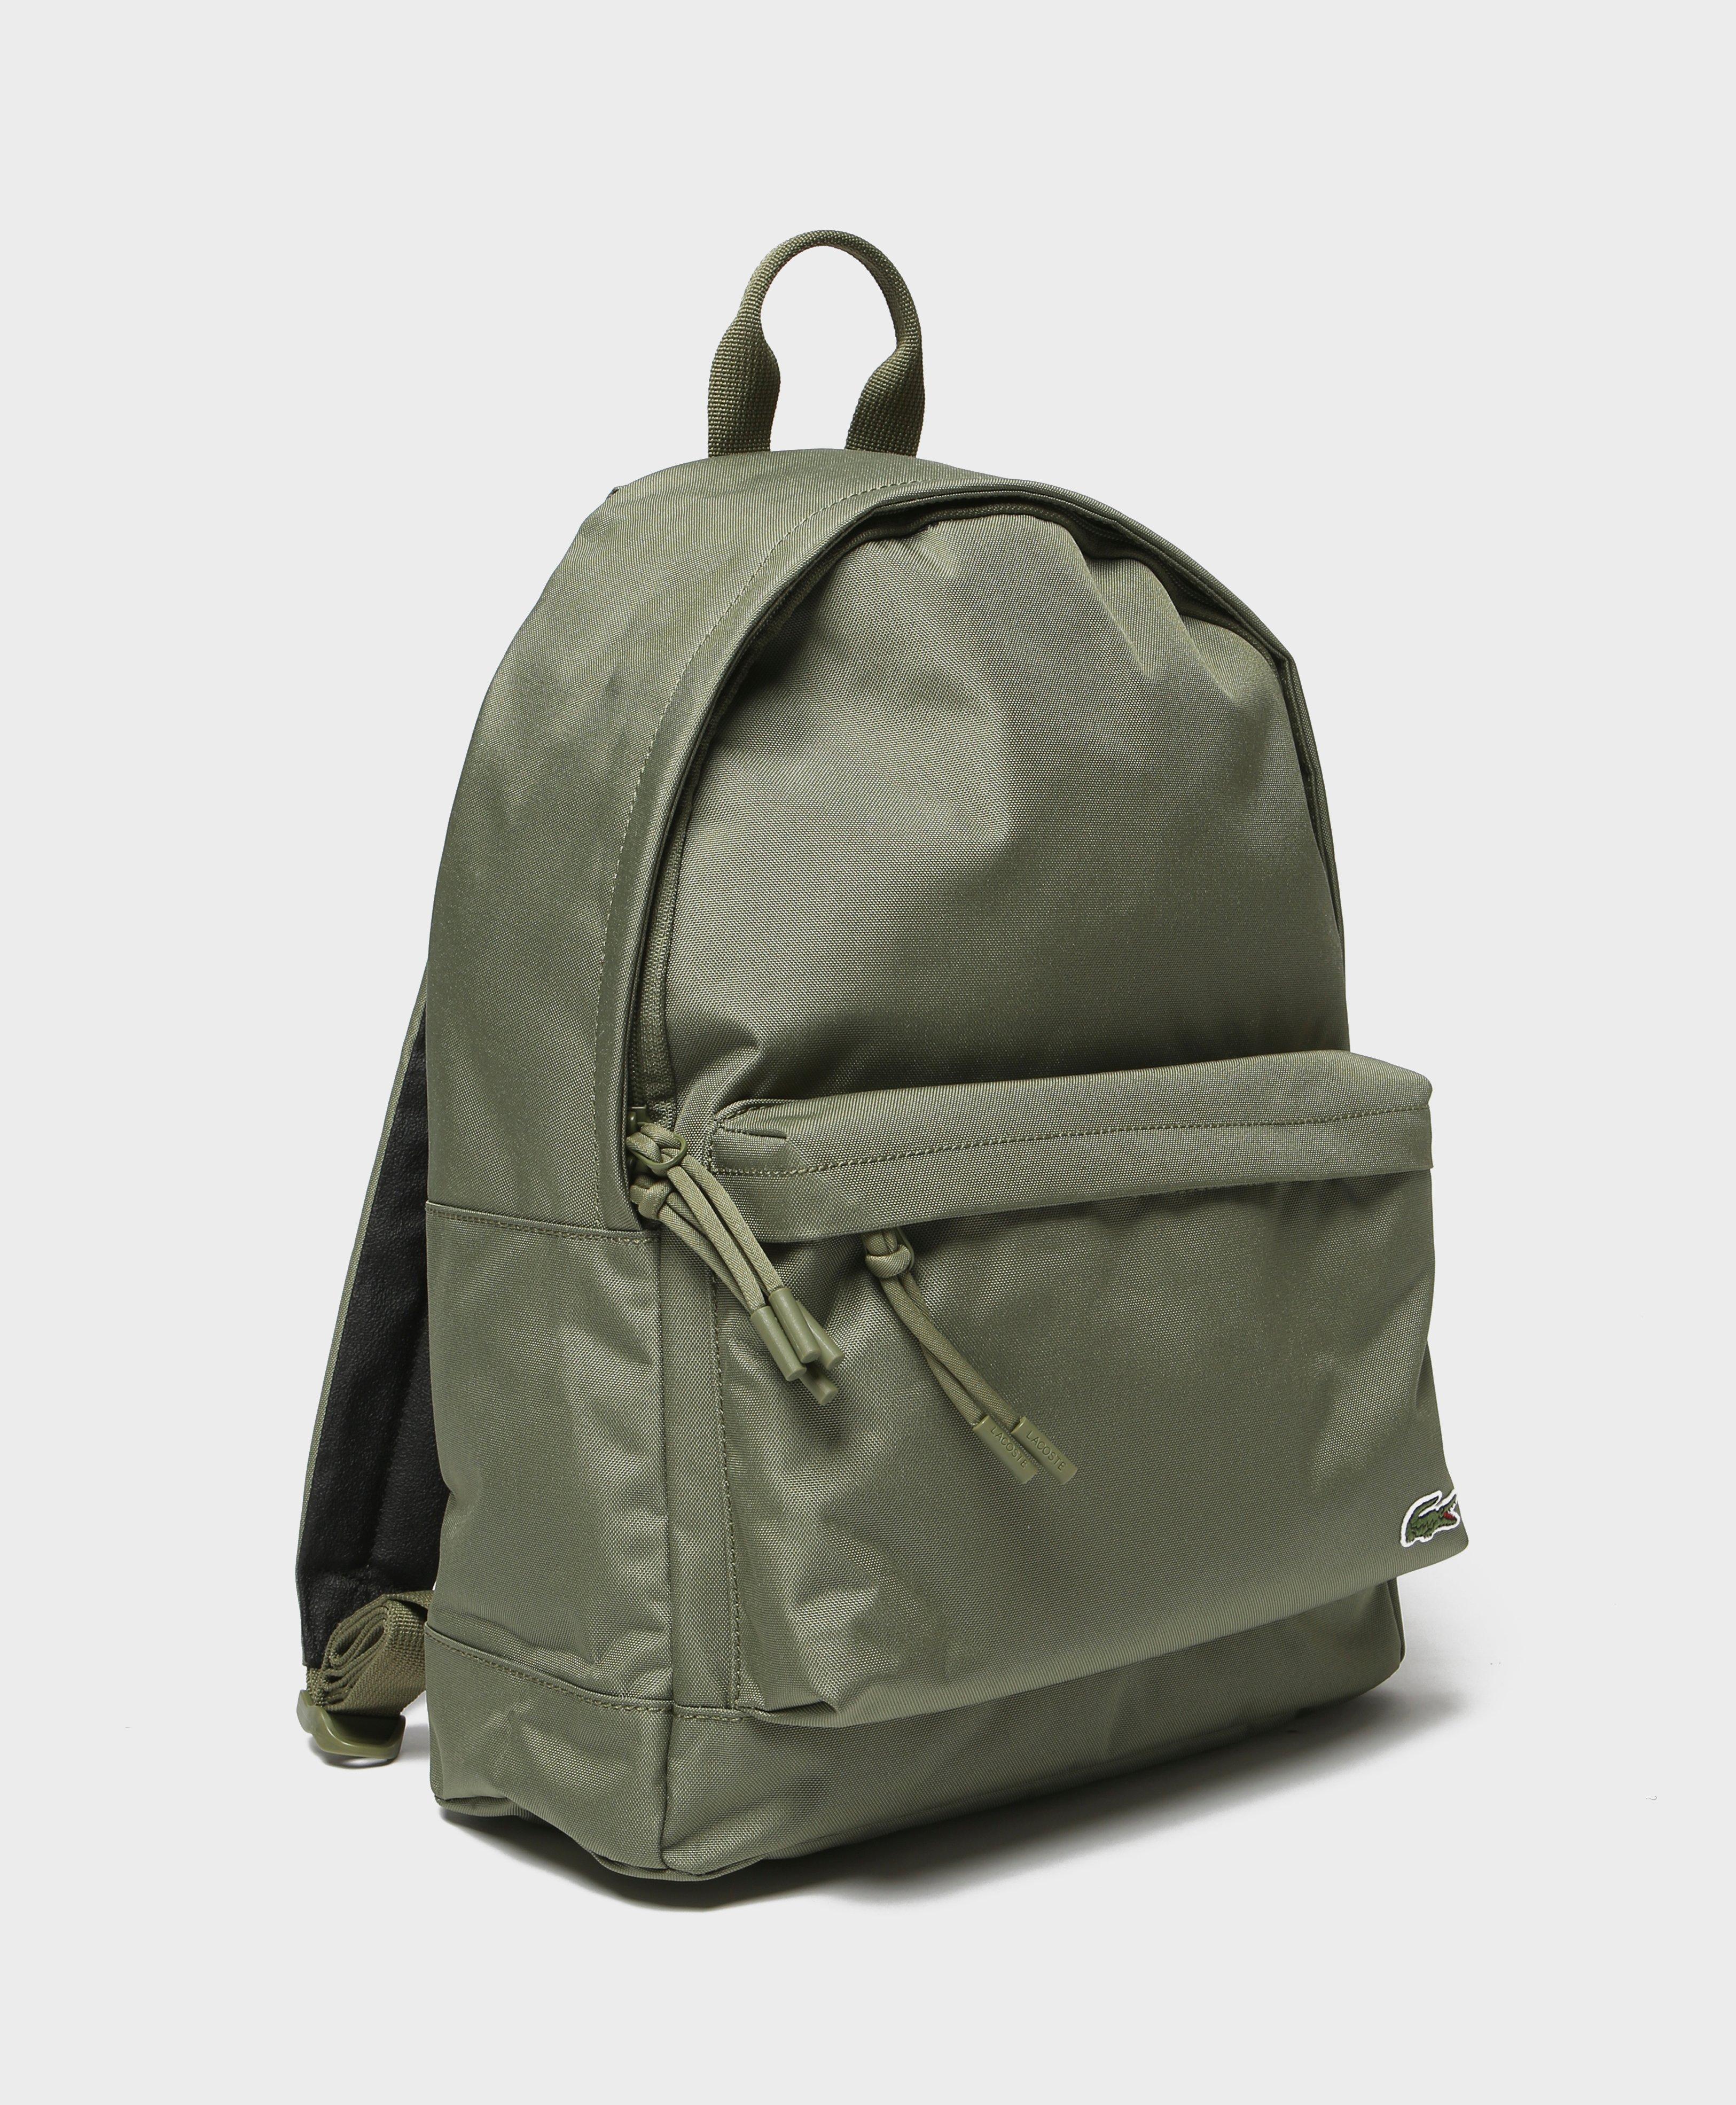 Lacoste Synthetic Backpack in Green for Men - Lyst